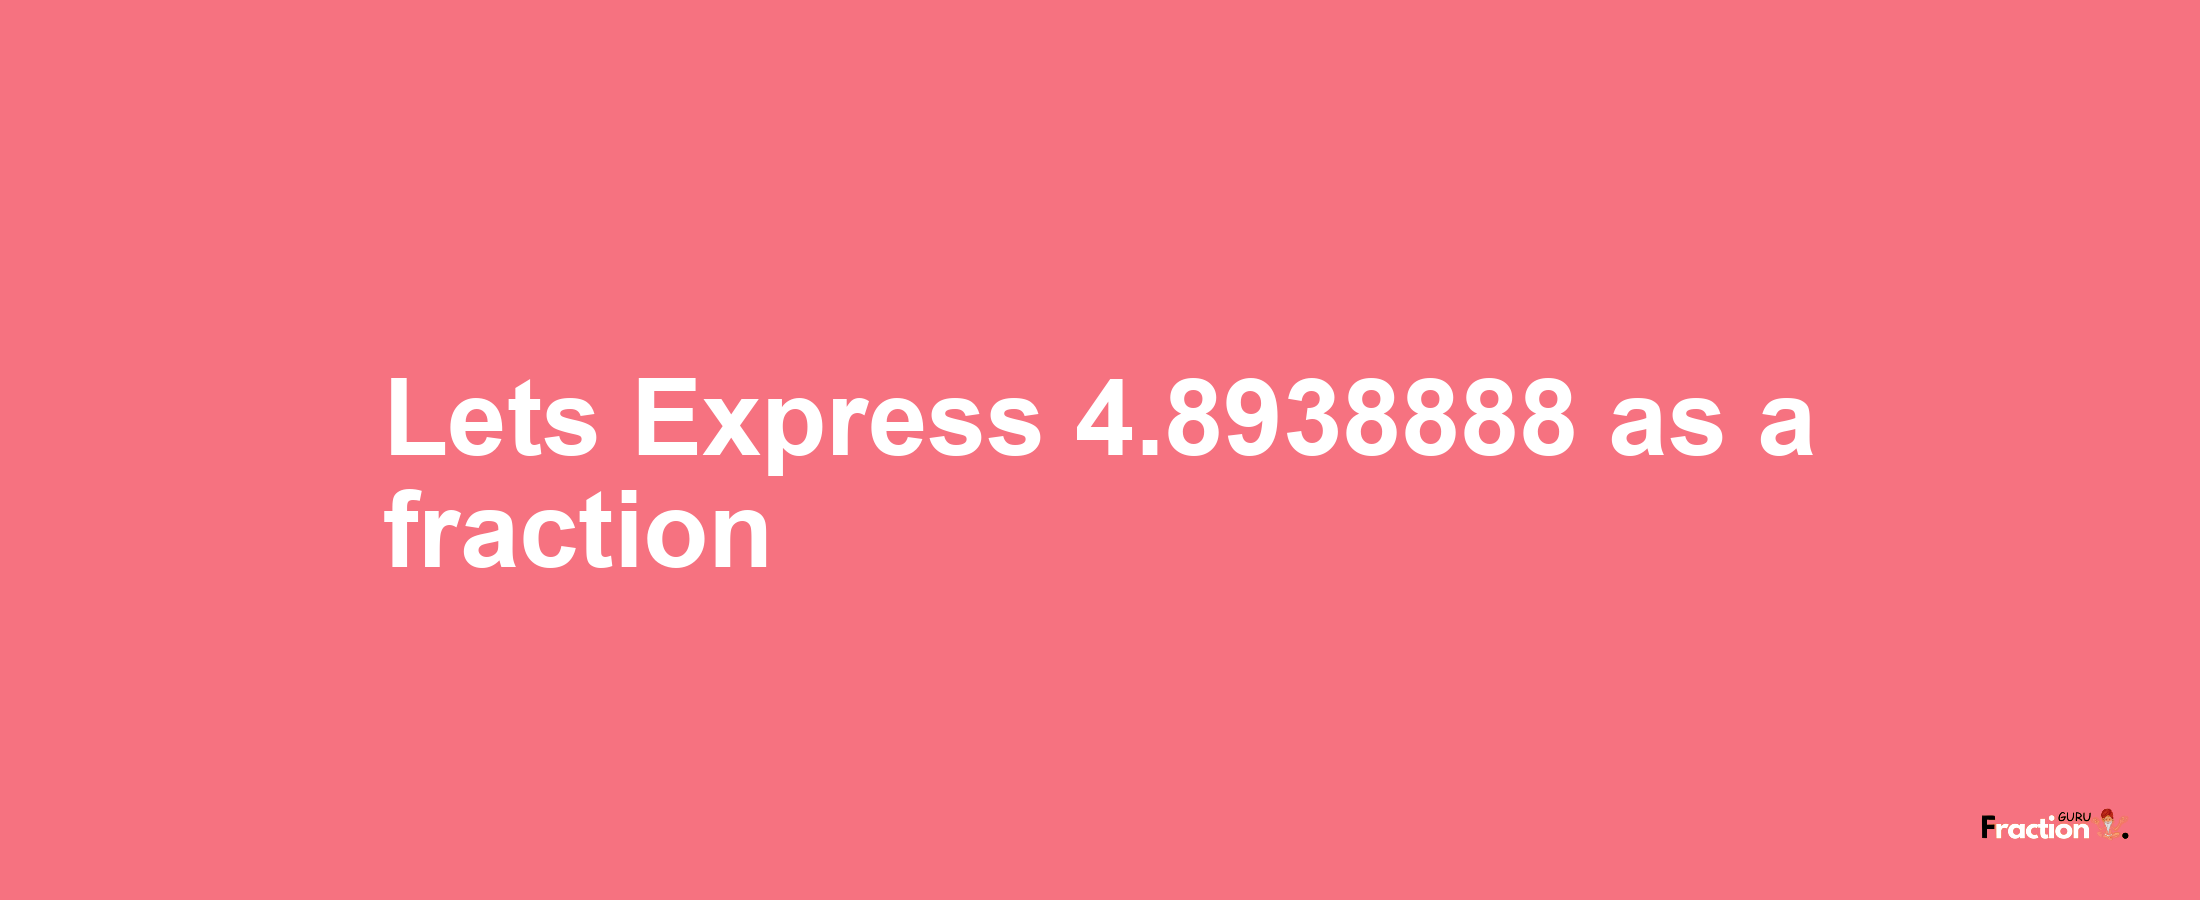 Lets Express 4.8938888 as afraction